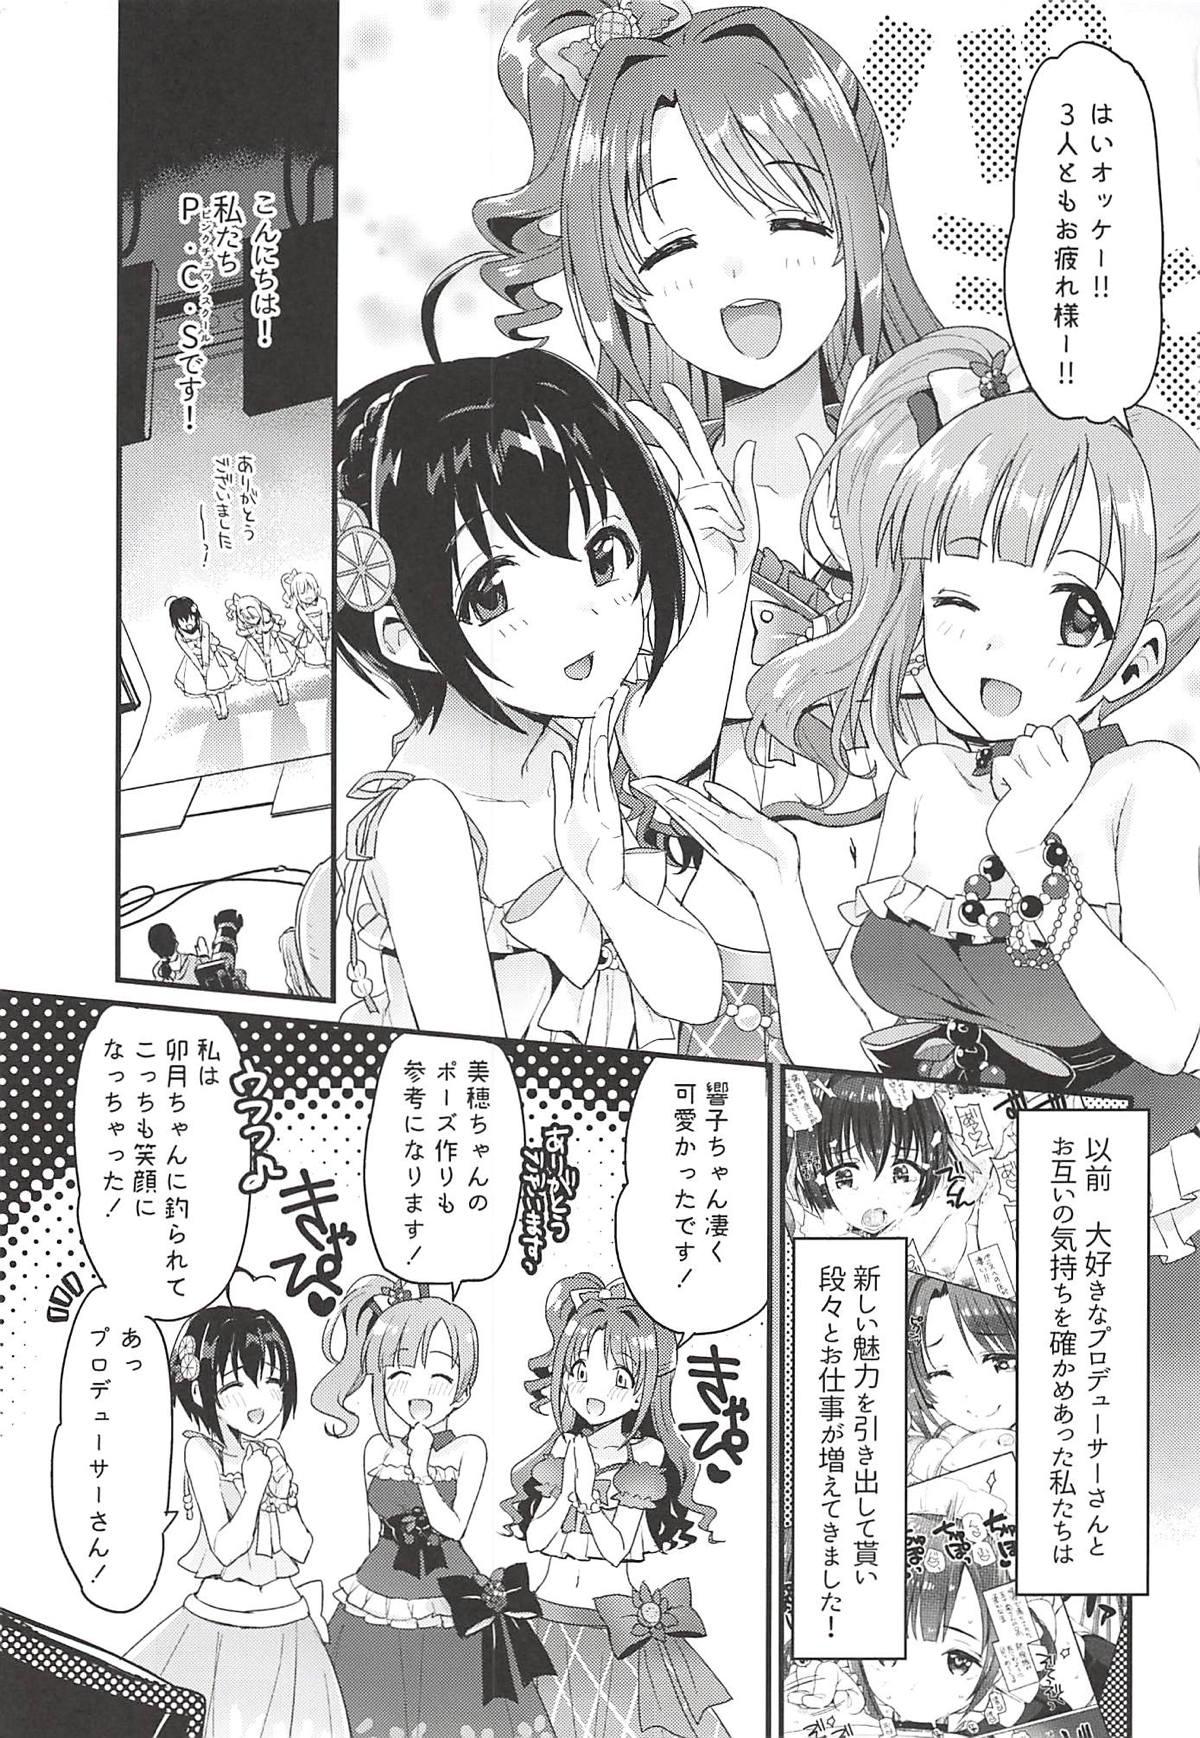 Red Pure Cream Shortcakes 2 - The idolmaster Dorm - Page 2